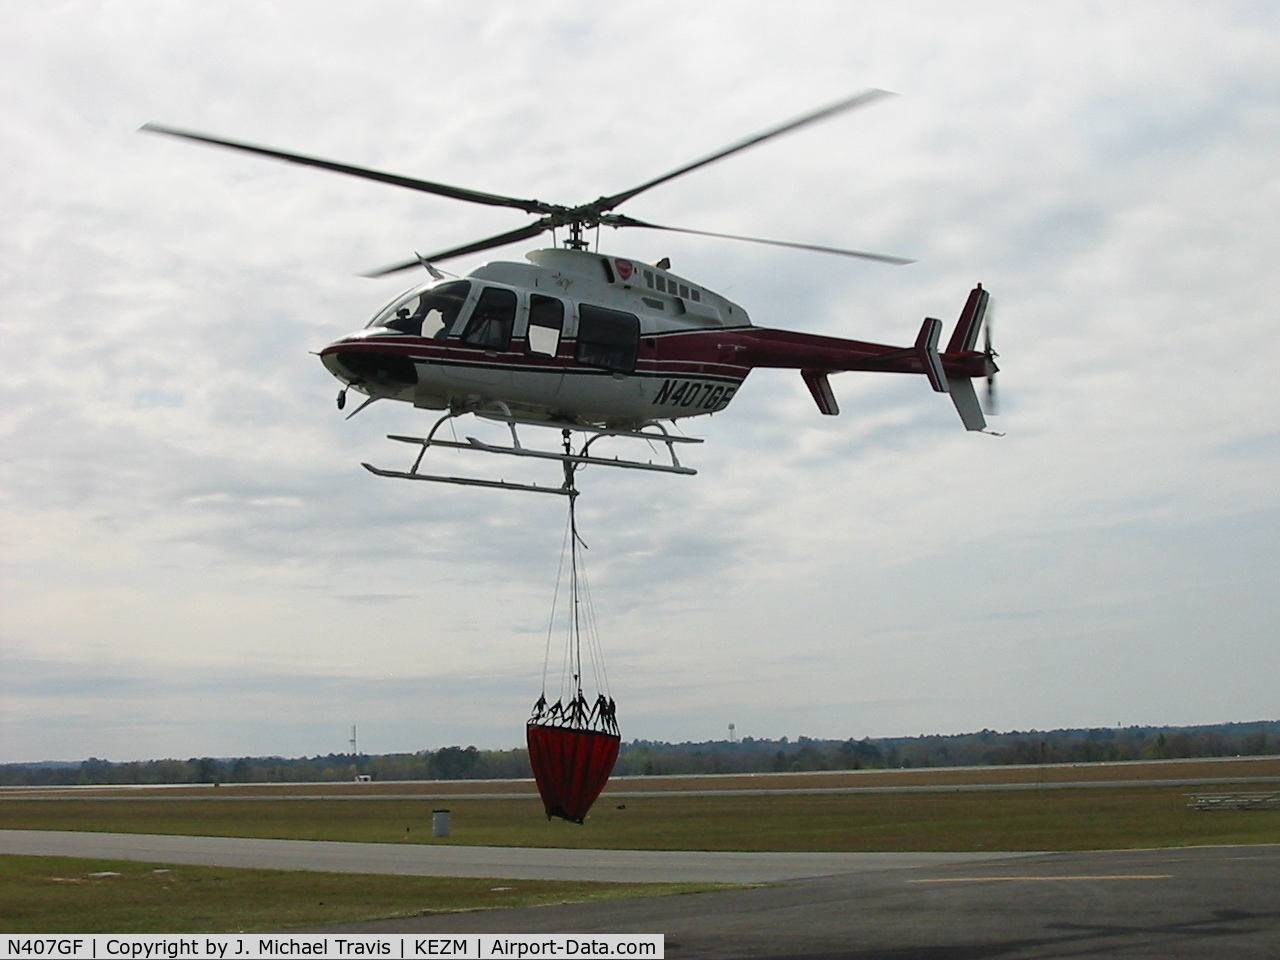 N407GF, 2000 Bell 407 C/N 53452, Forestry Service Bell 407 landing for fuel after a water drop.